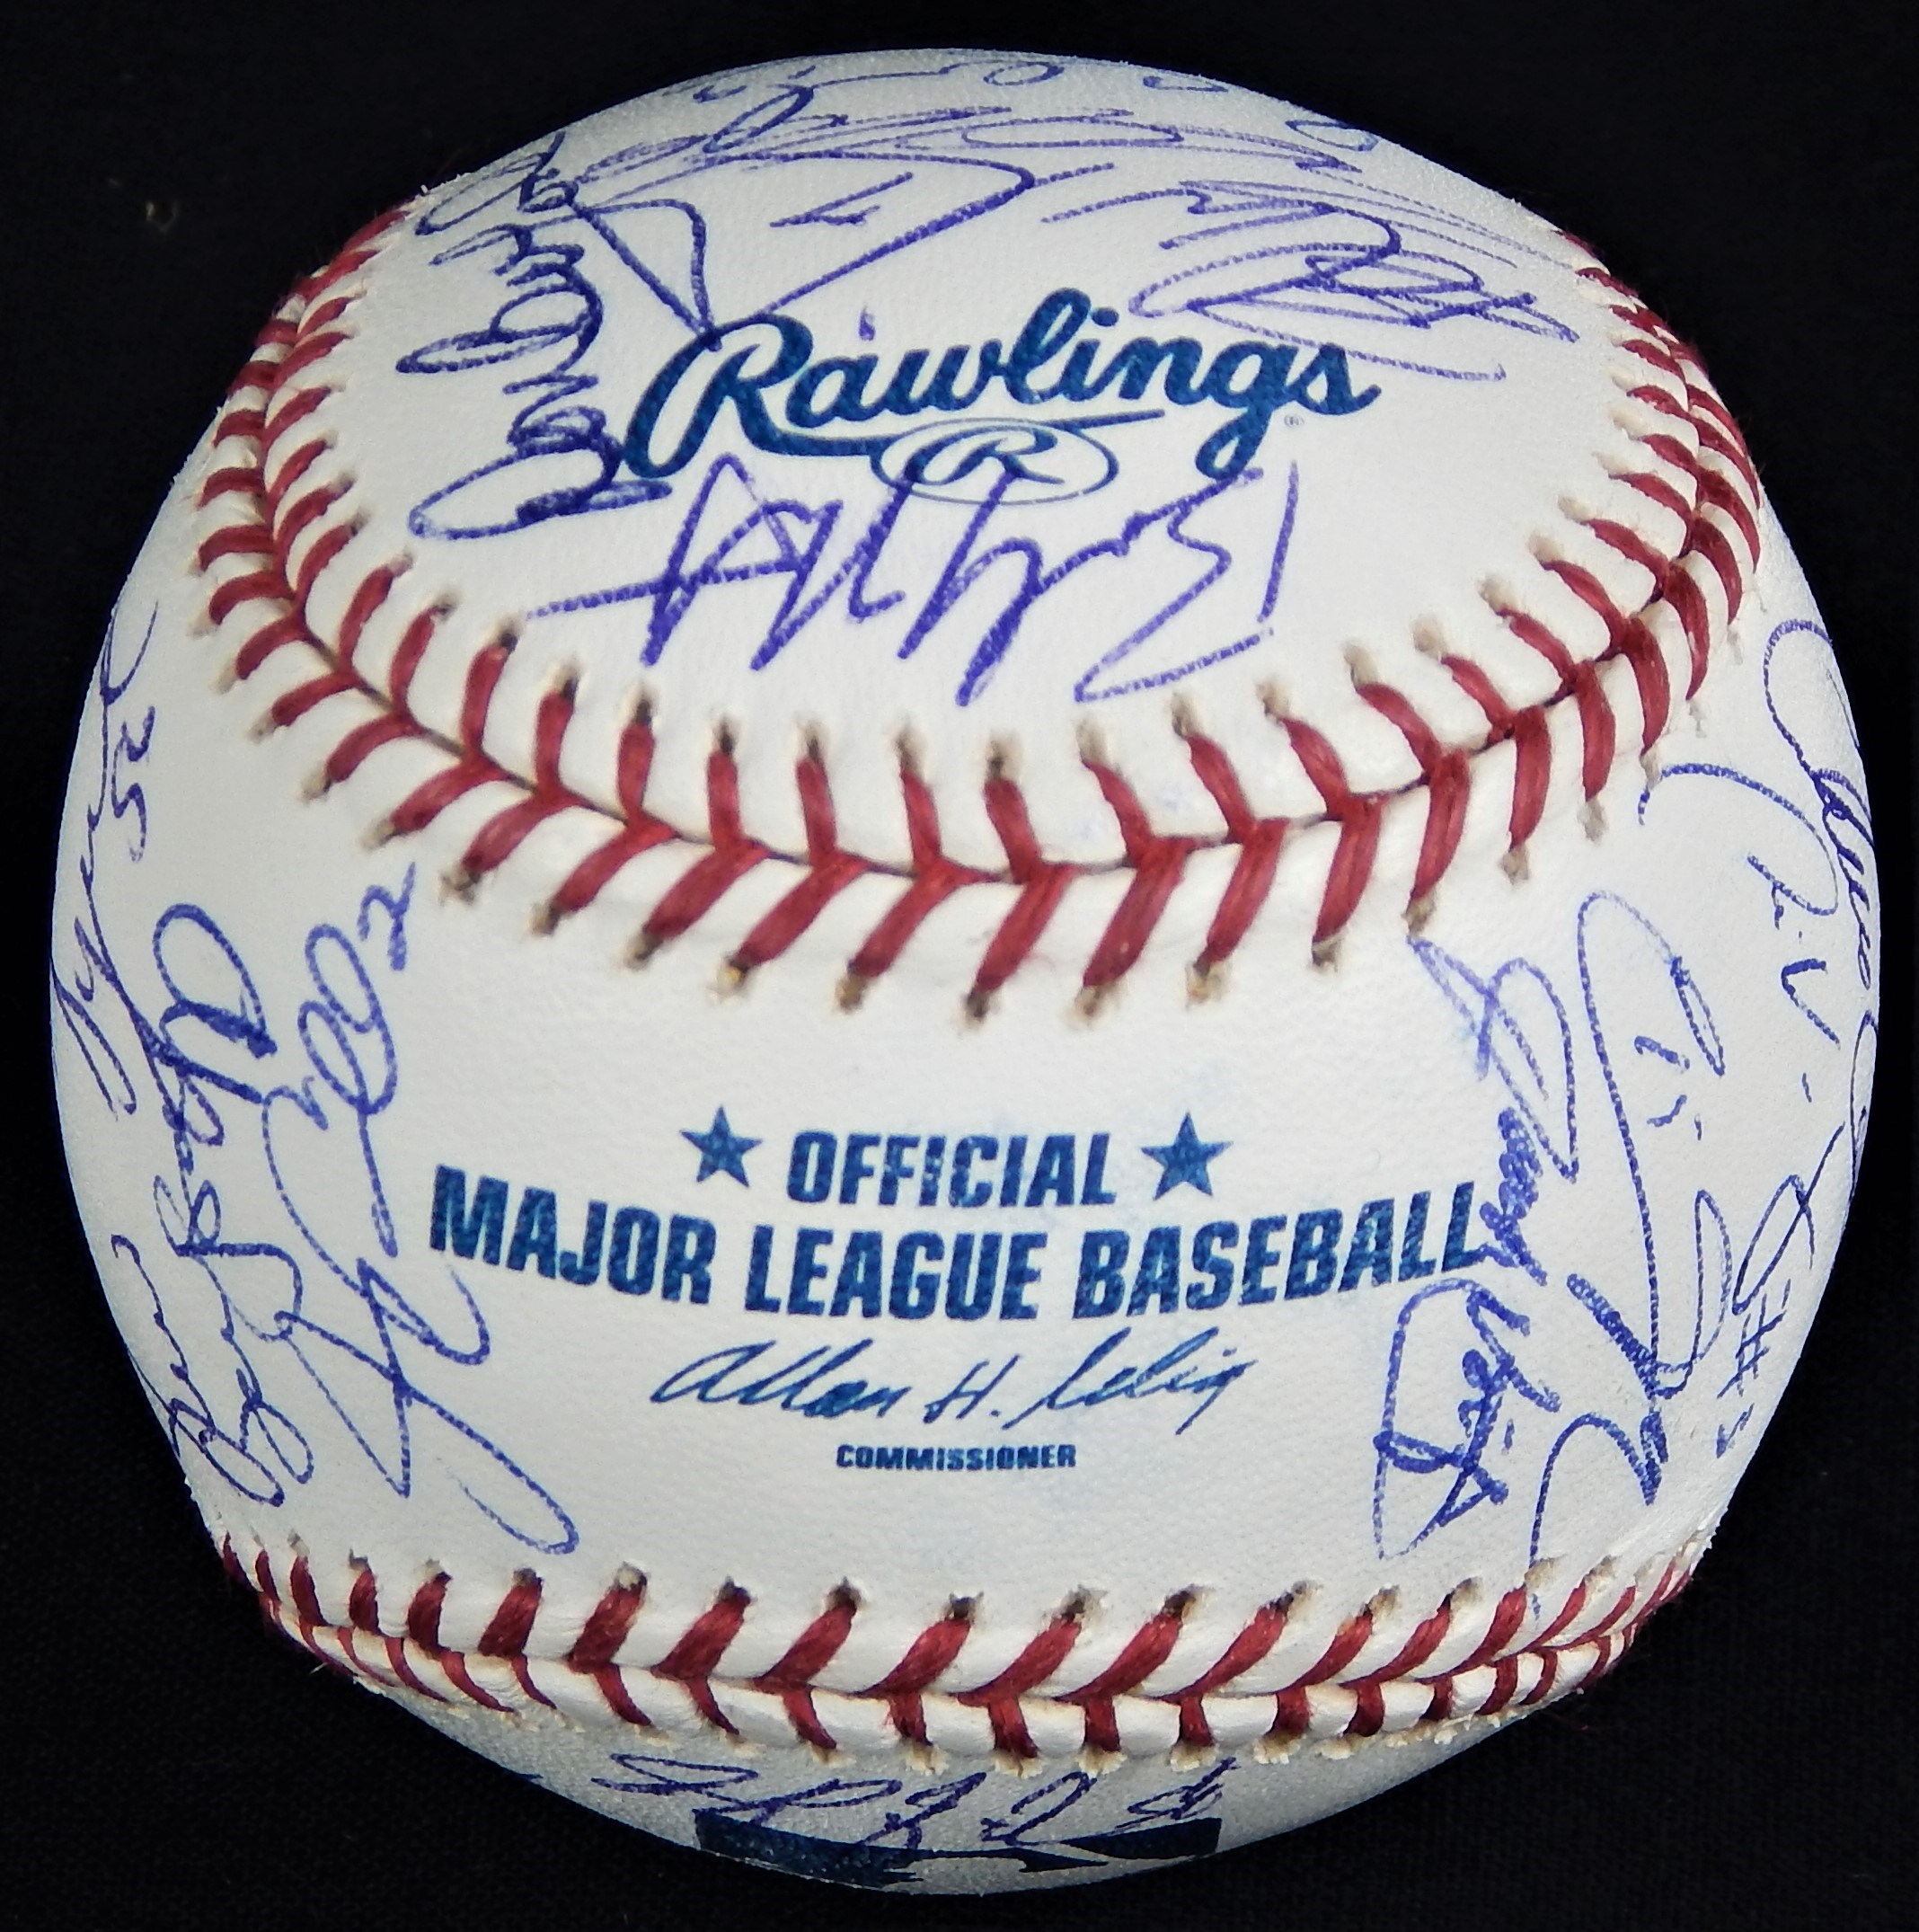 2005 Washington Nationals First Year Team Signed Baseball with Frank Robinson